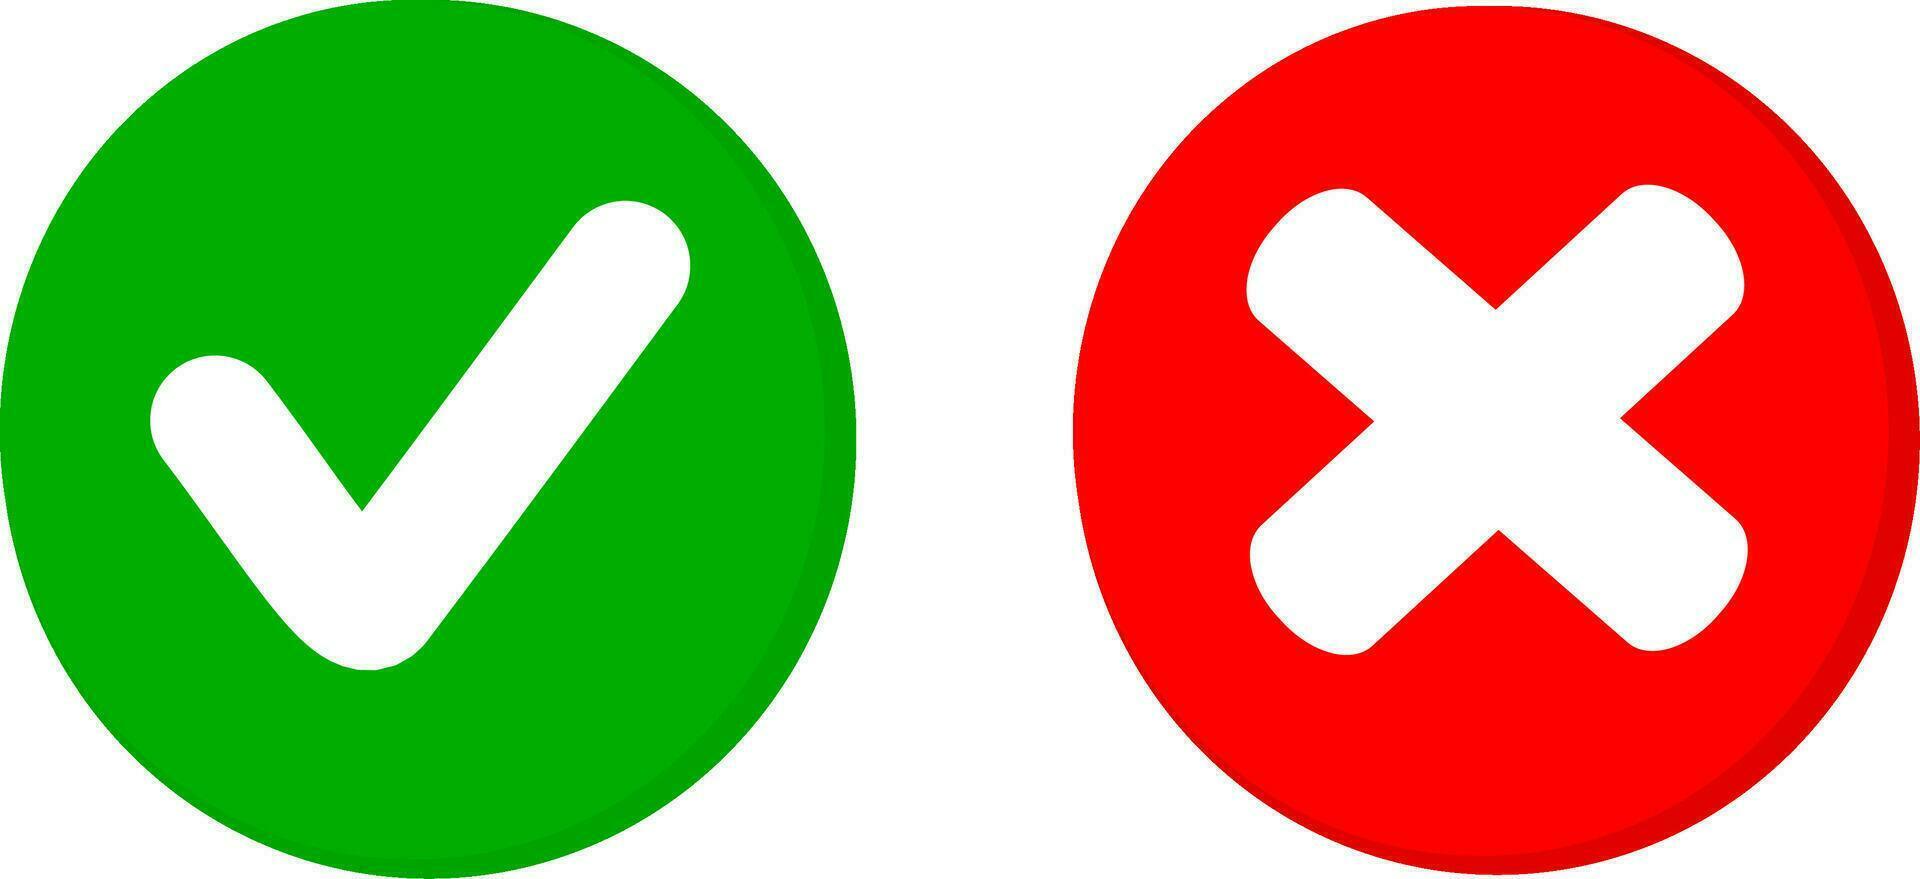 Tick and cross signs. Green checkmark and red X icons isolated on white background. Replaceable vector design. Vector illustration.